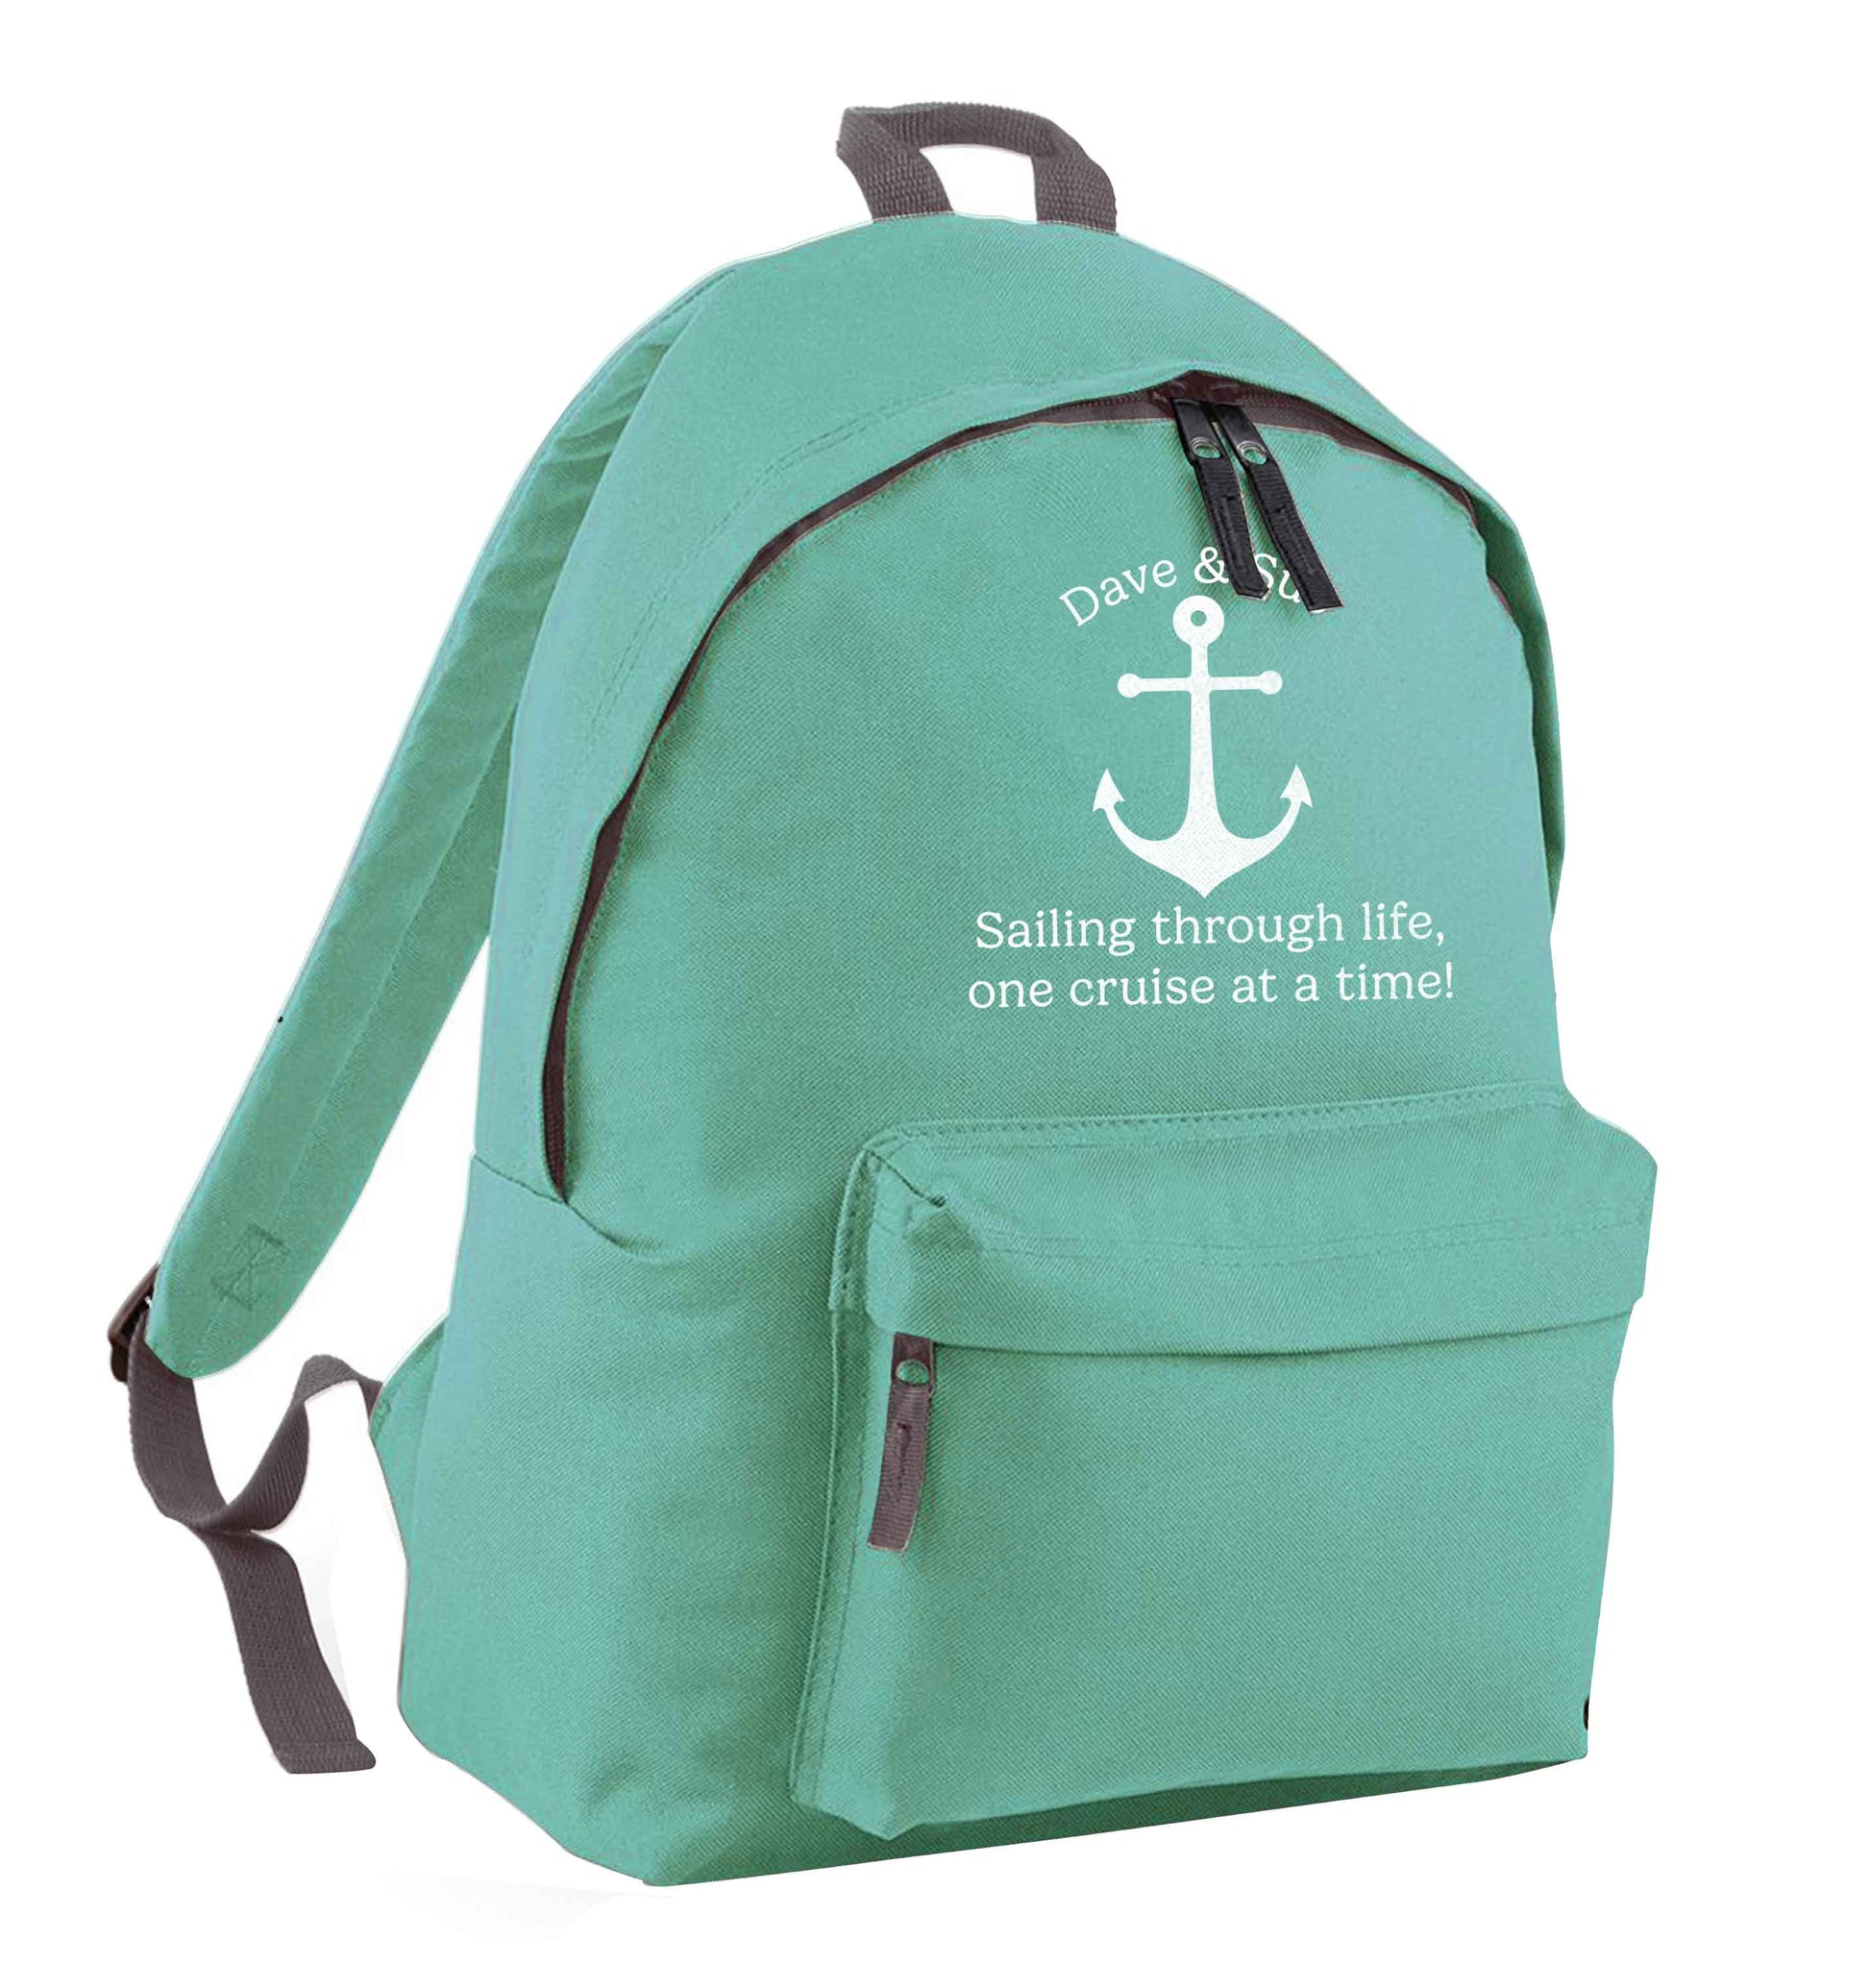 Sailing through life one cruise at a time - personalised mint adults backpack